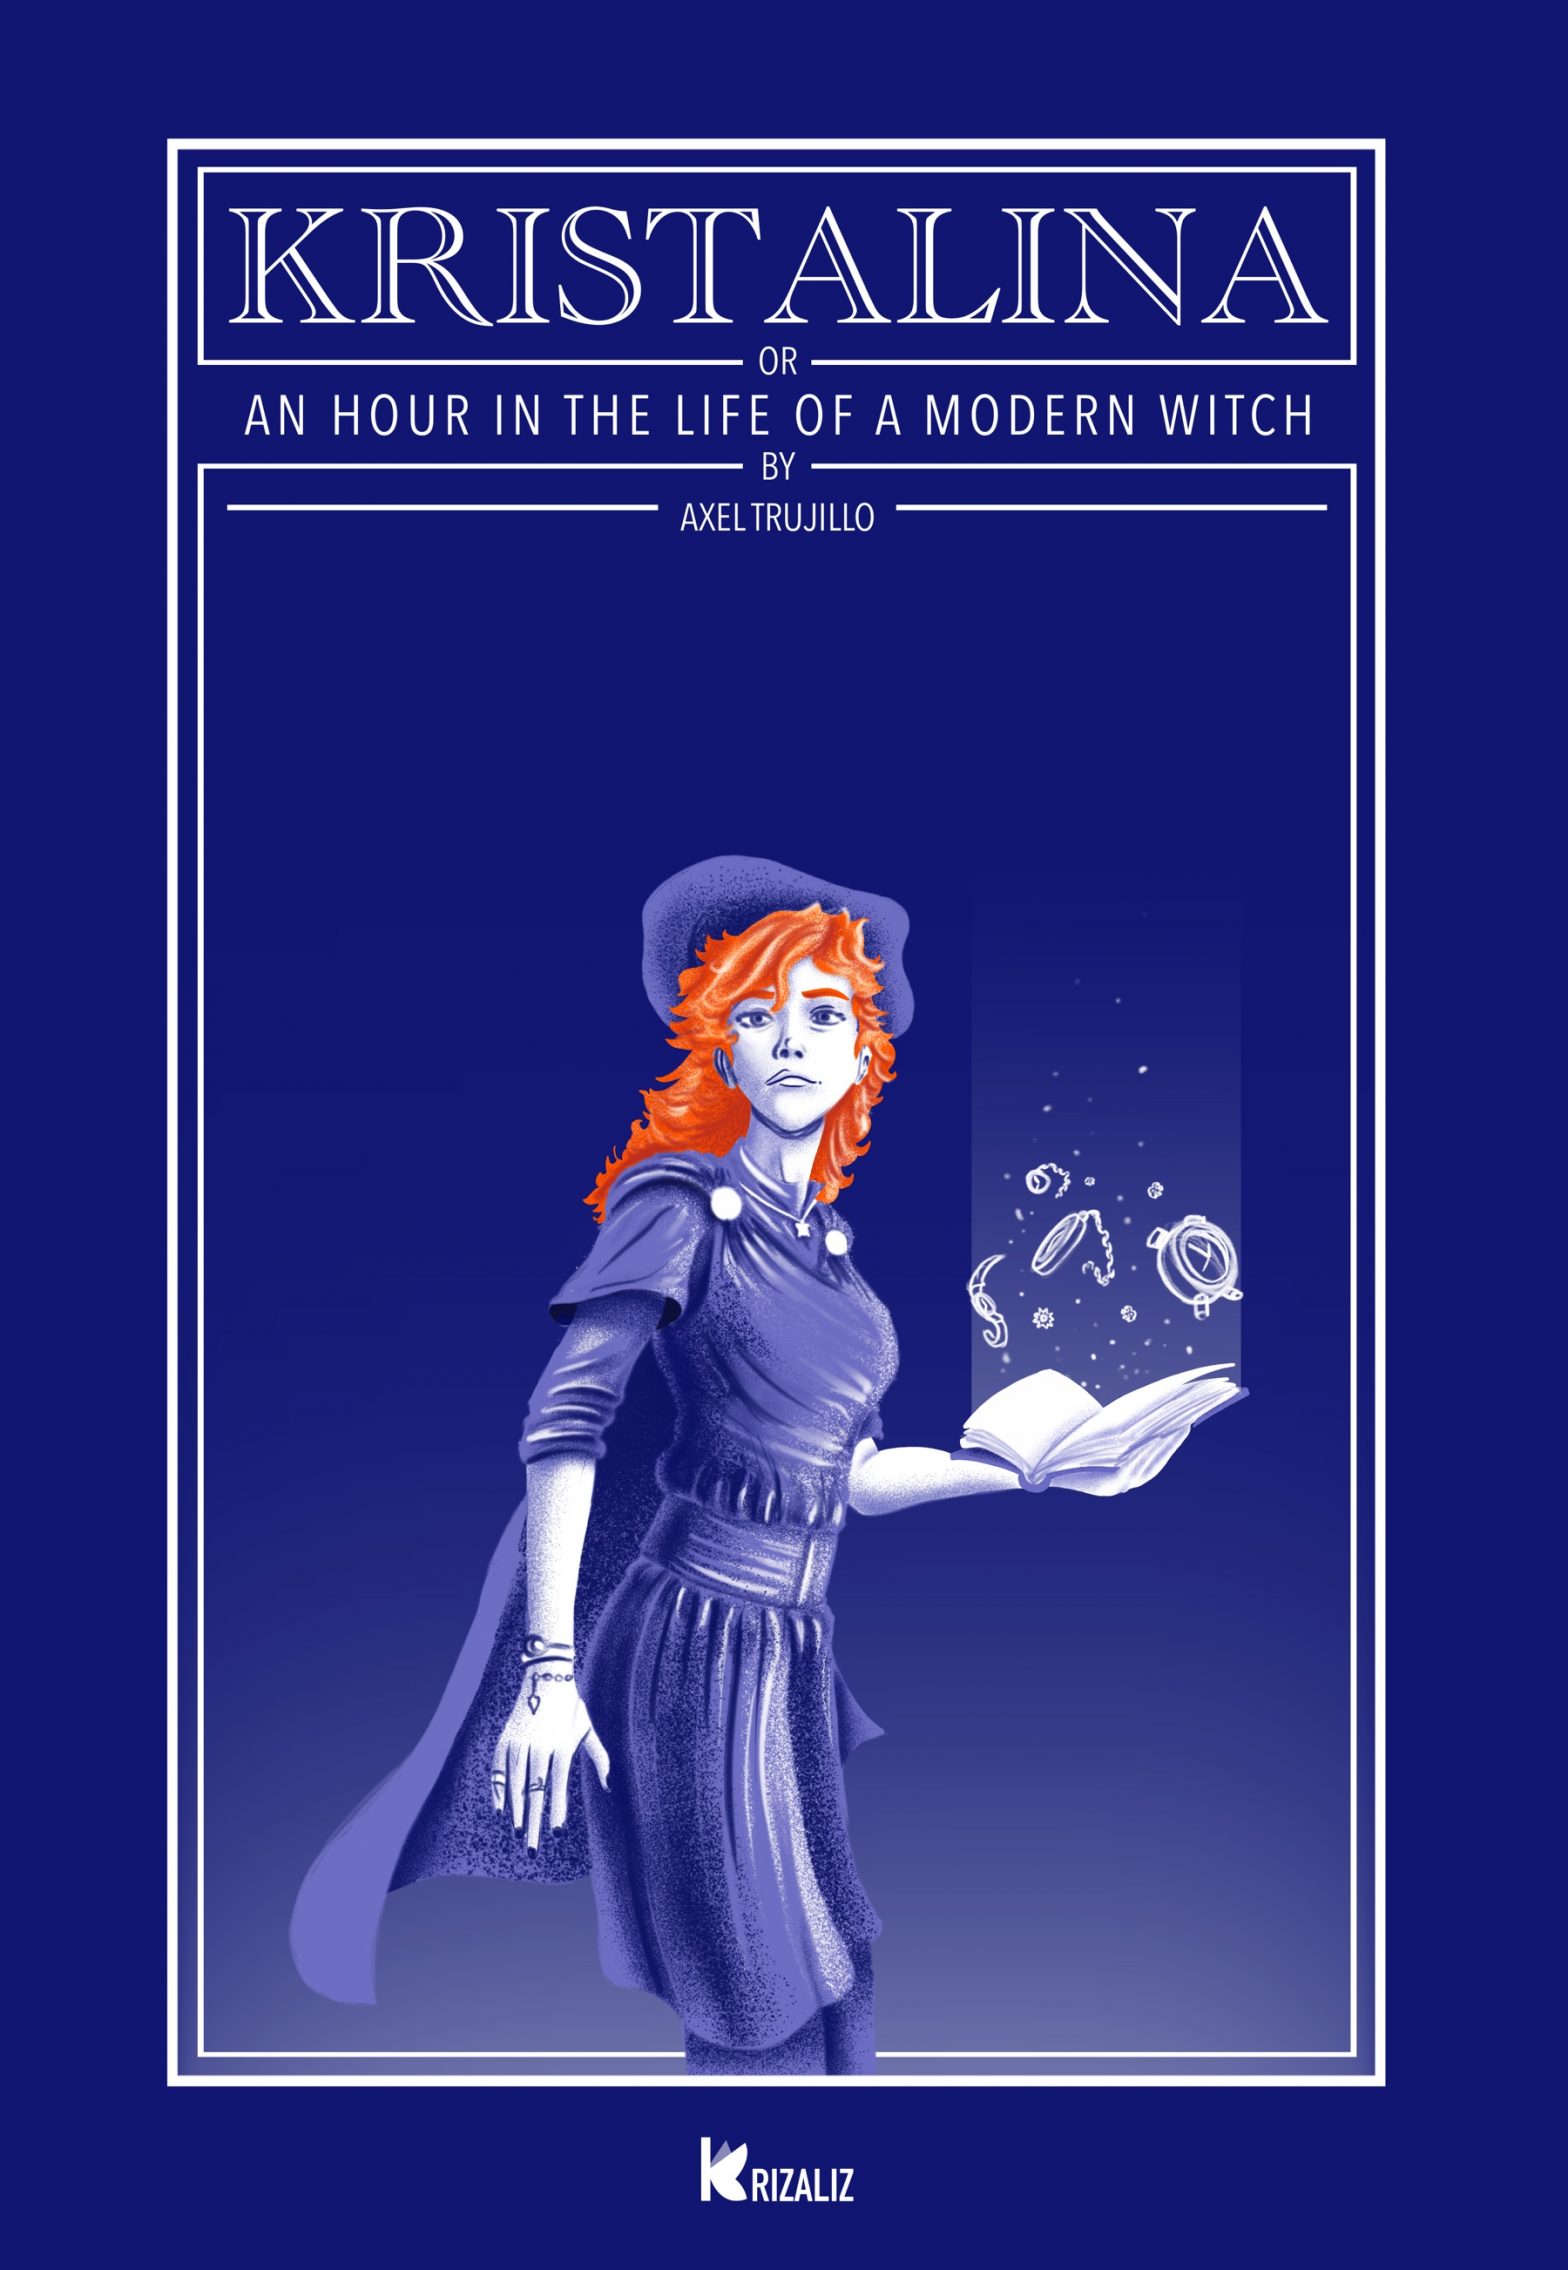 Kristalina or An hour in the life of a modern witch